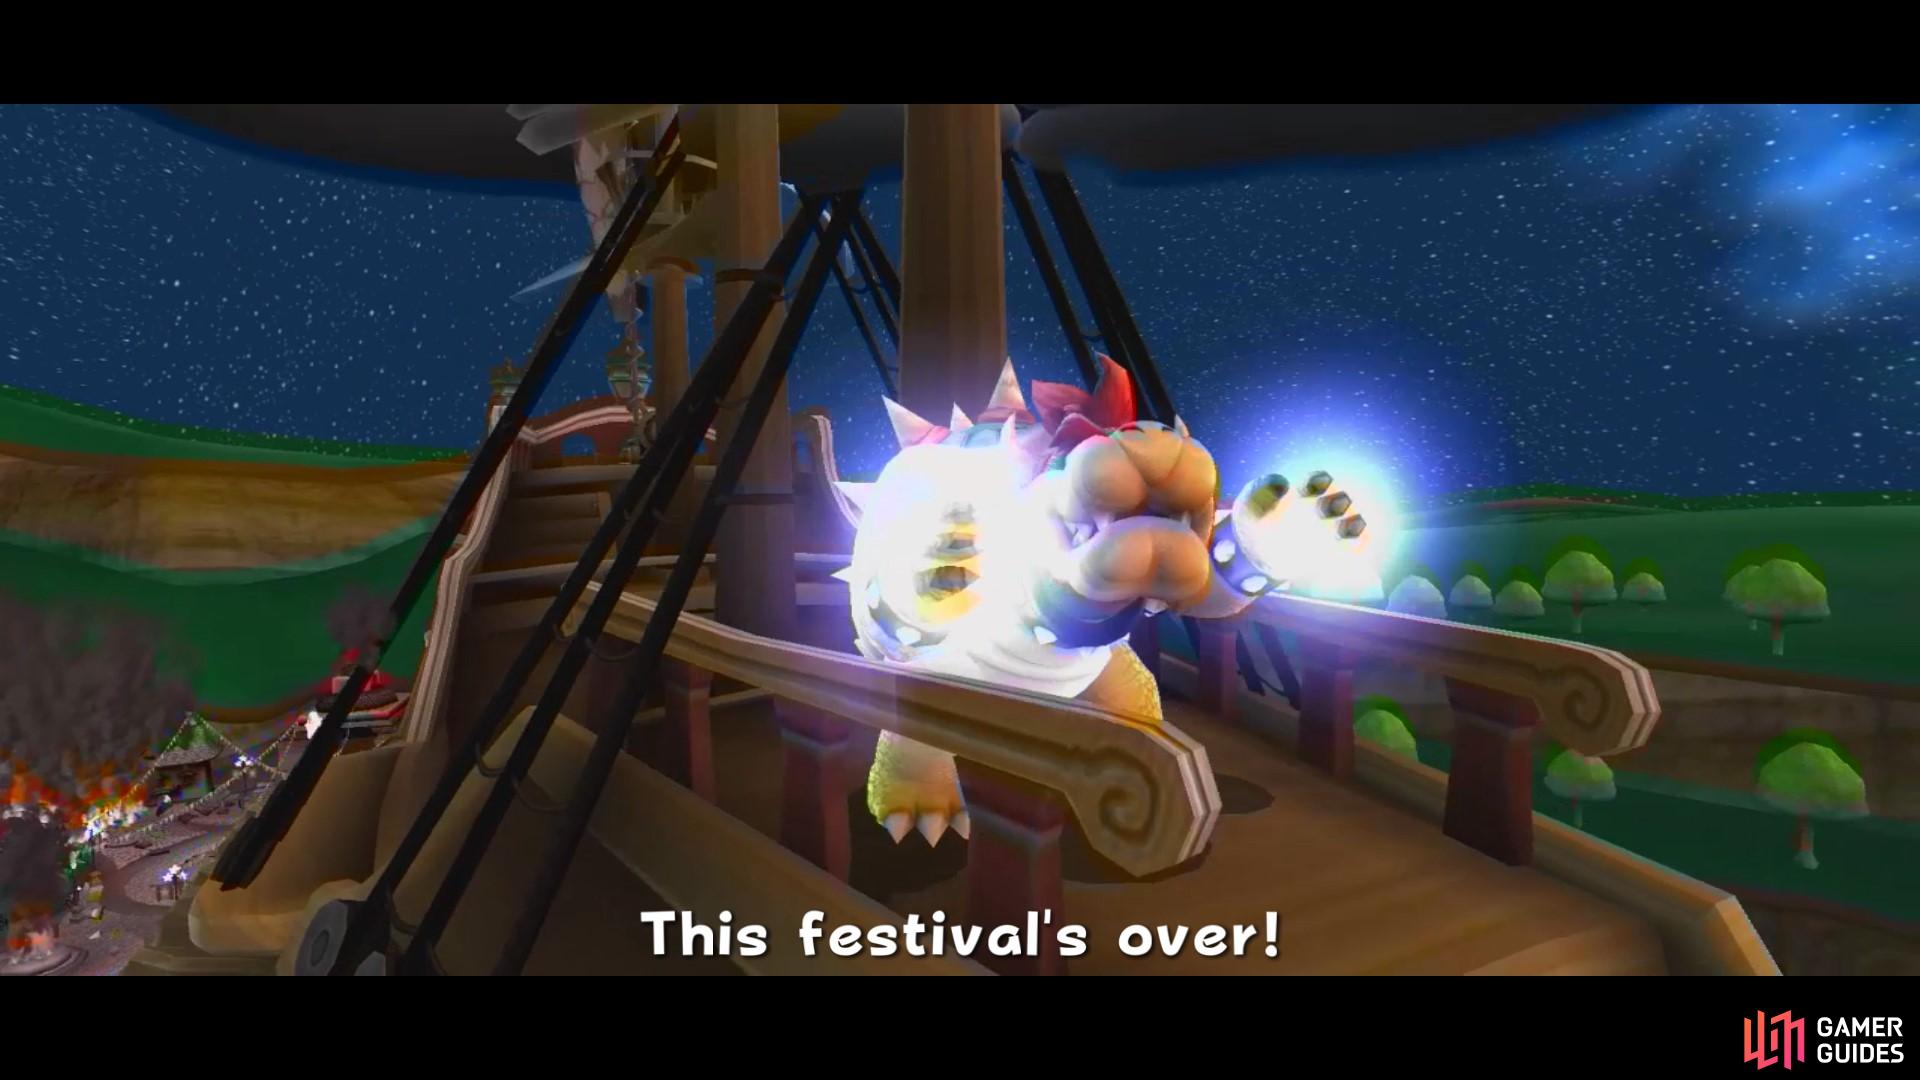 Bowser attacks Toad Town and steals Princess Peach!